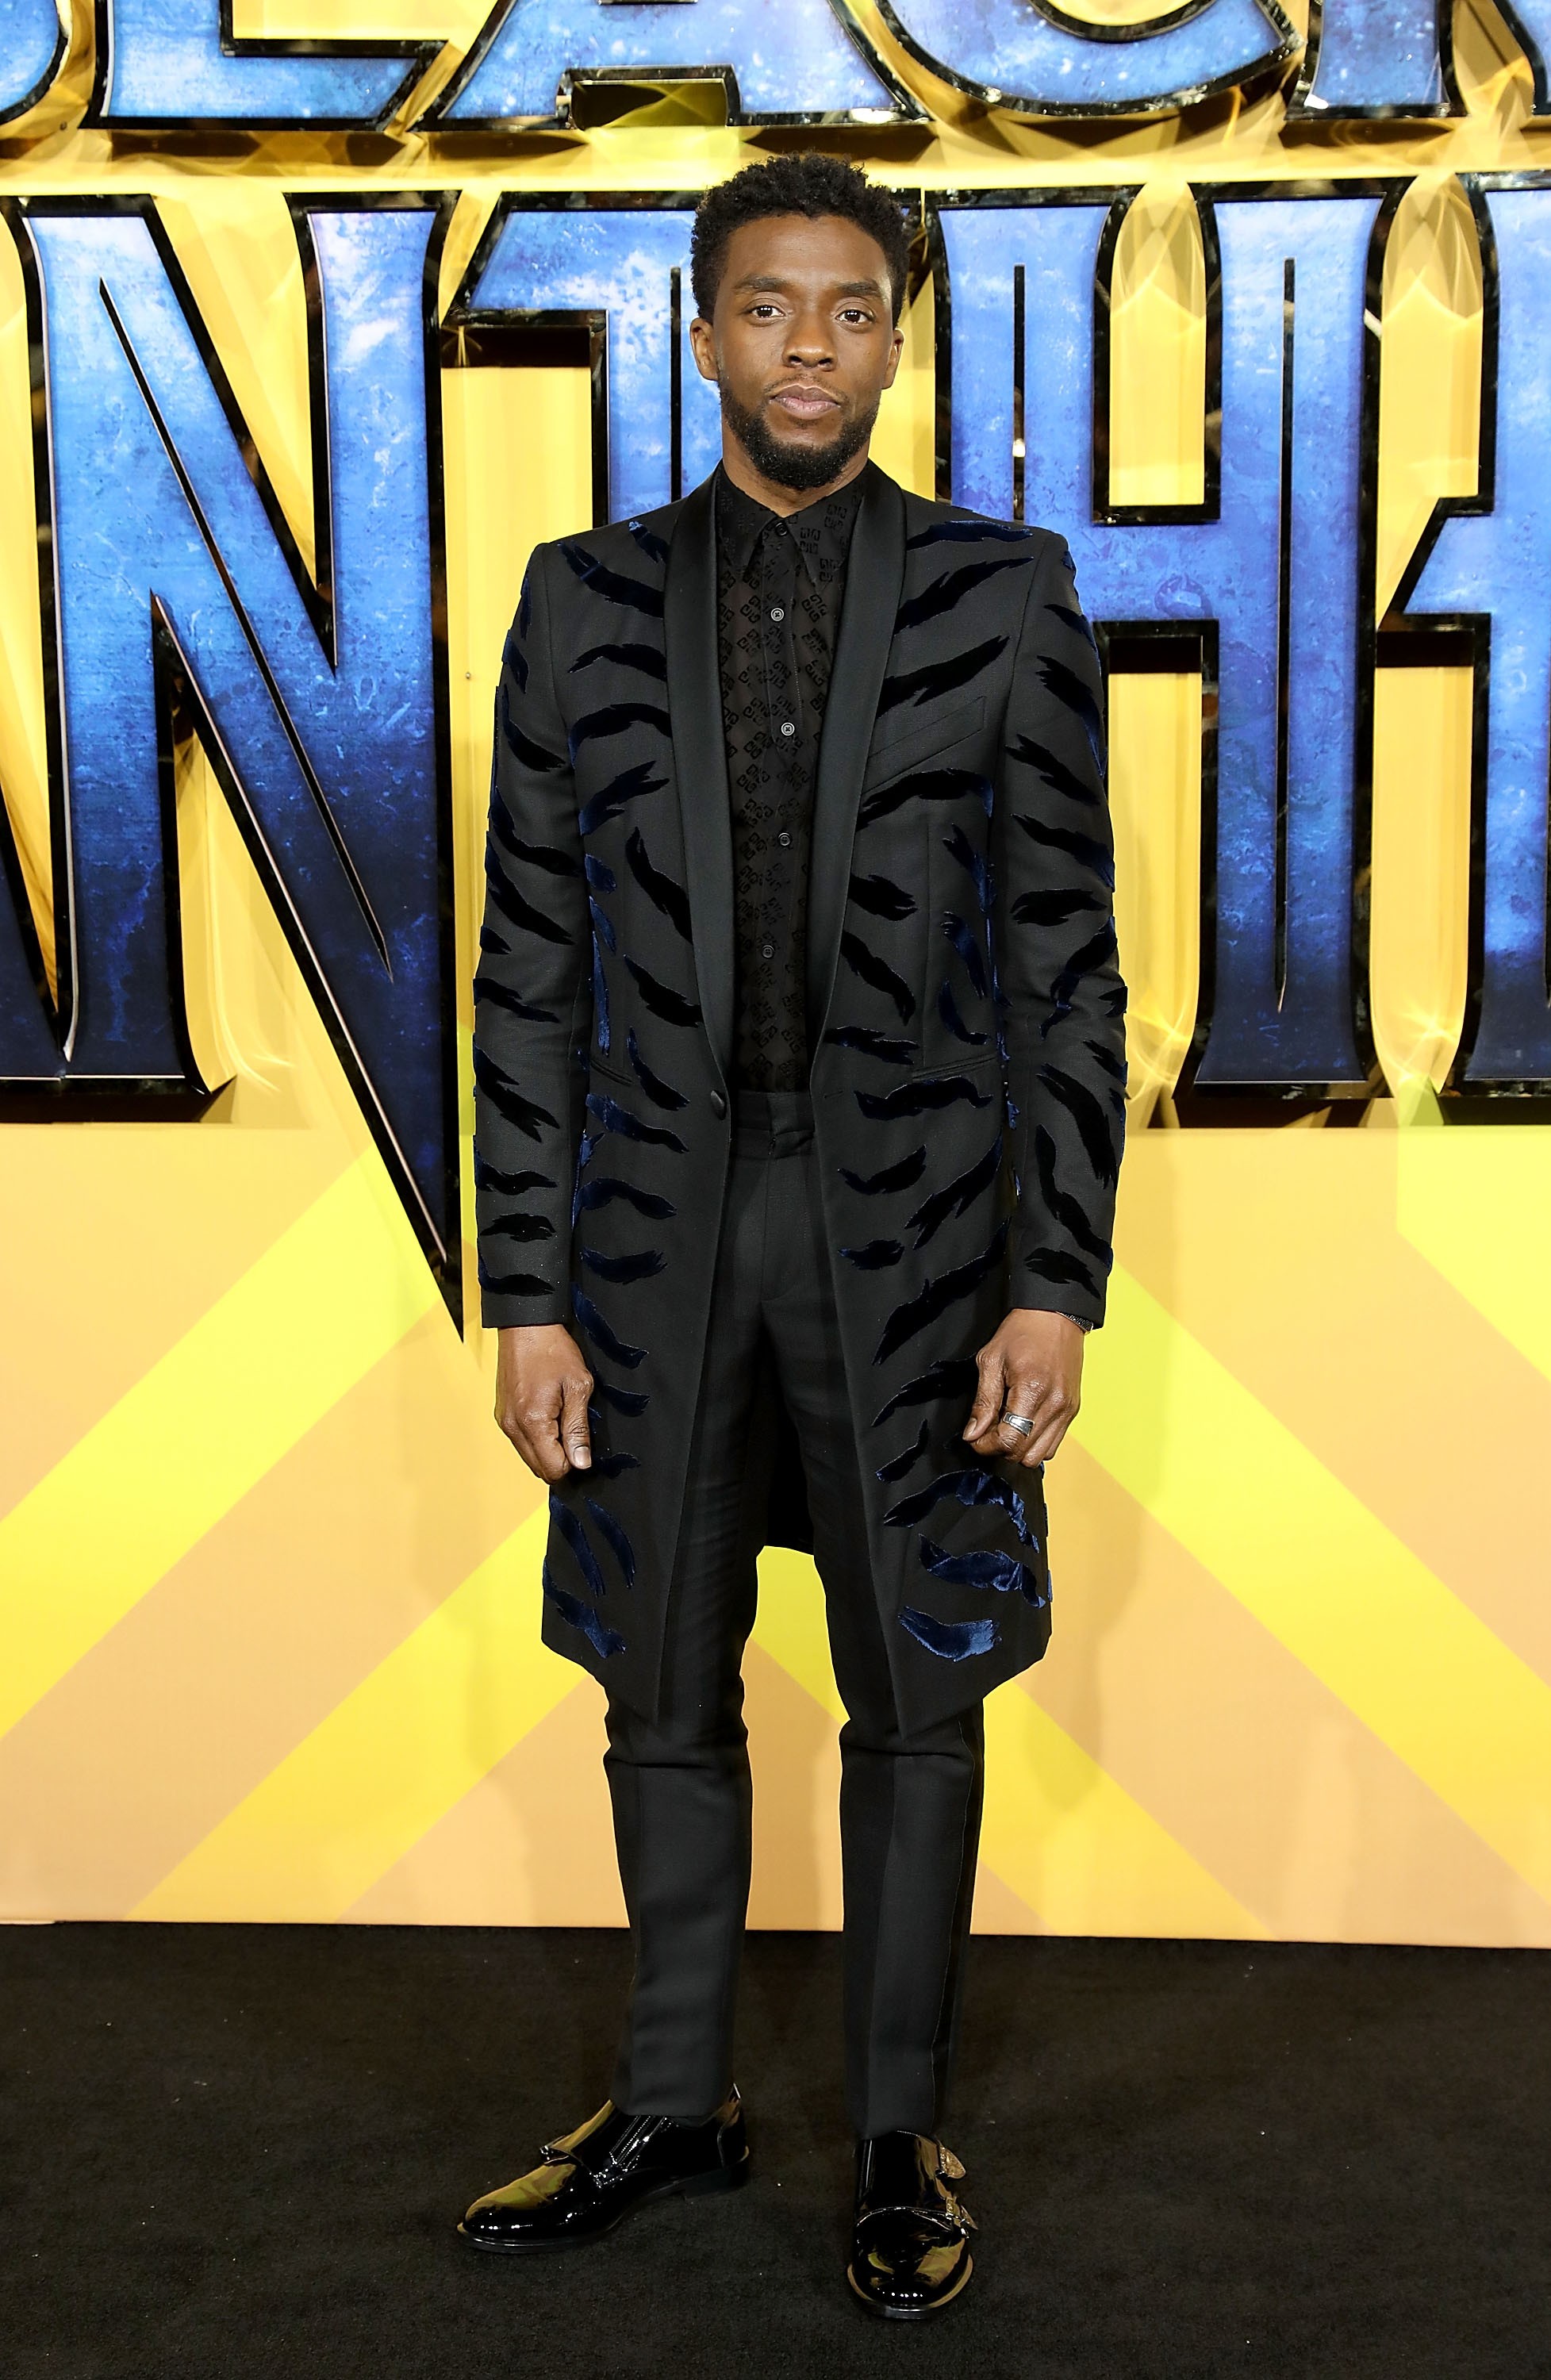 LONDON, ENGLAND - FEBRUARY 08:  Chadwick Boseman attends the European Premiere of 'Black Panther' at Eventim Apollo on February 8, 2018 in London, England.  (Photo by Tim P. Whitby/Tim P. Whitby/Getty Images) (Foto: Tim P. Whitby/Getty Images)